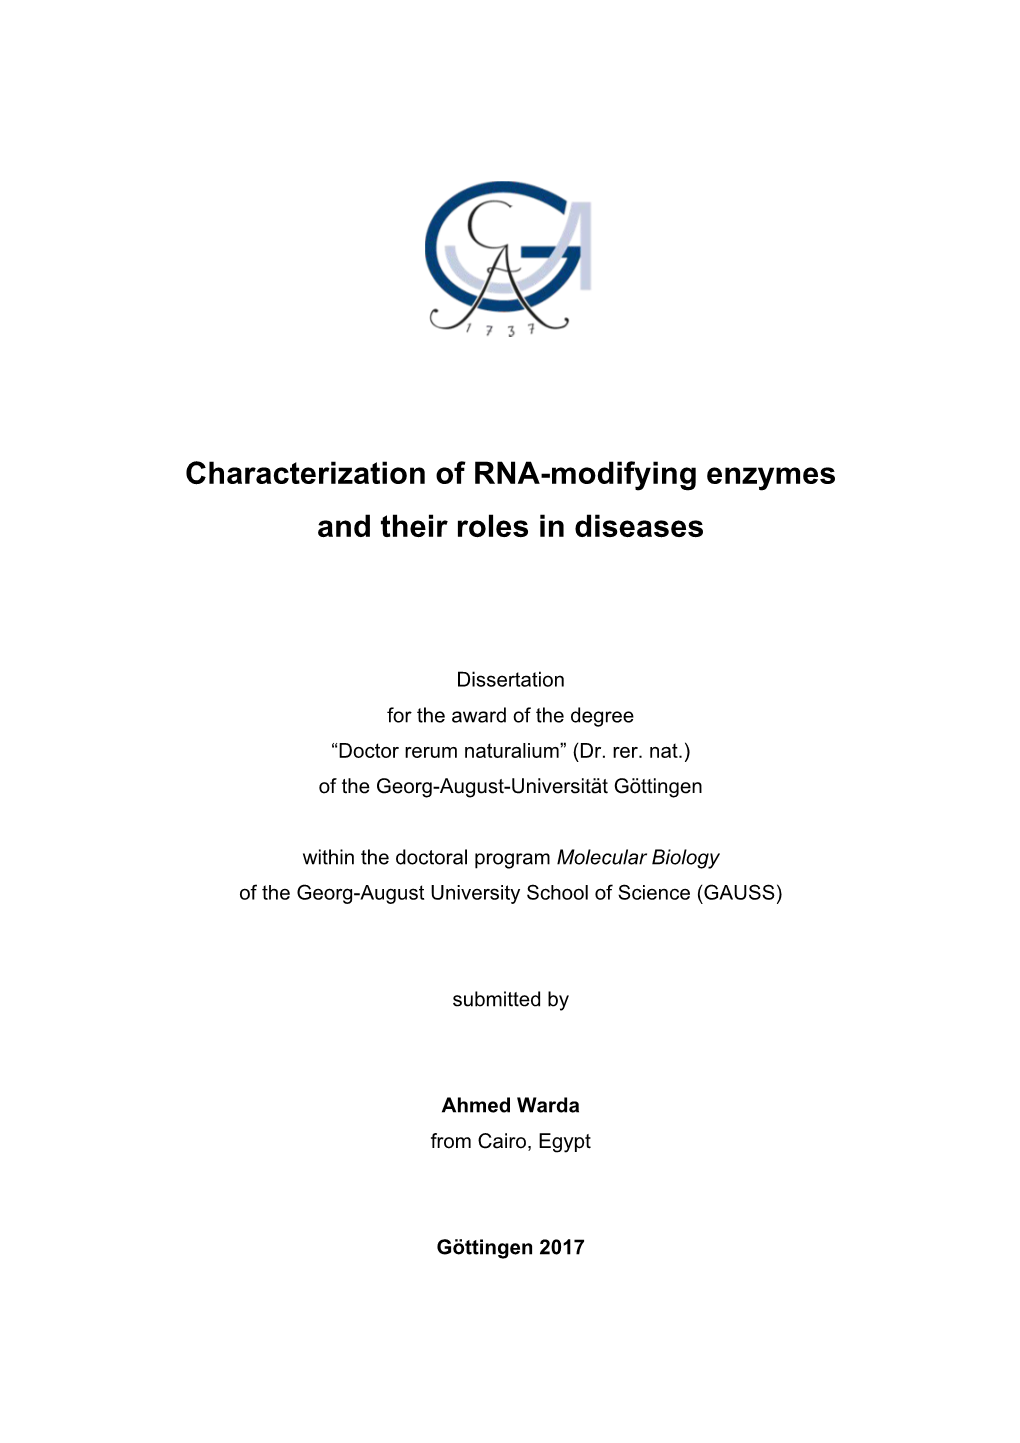 Characterization of RNA-Modifying Enzymes and Their Roles in Diseases